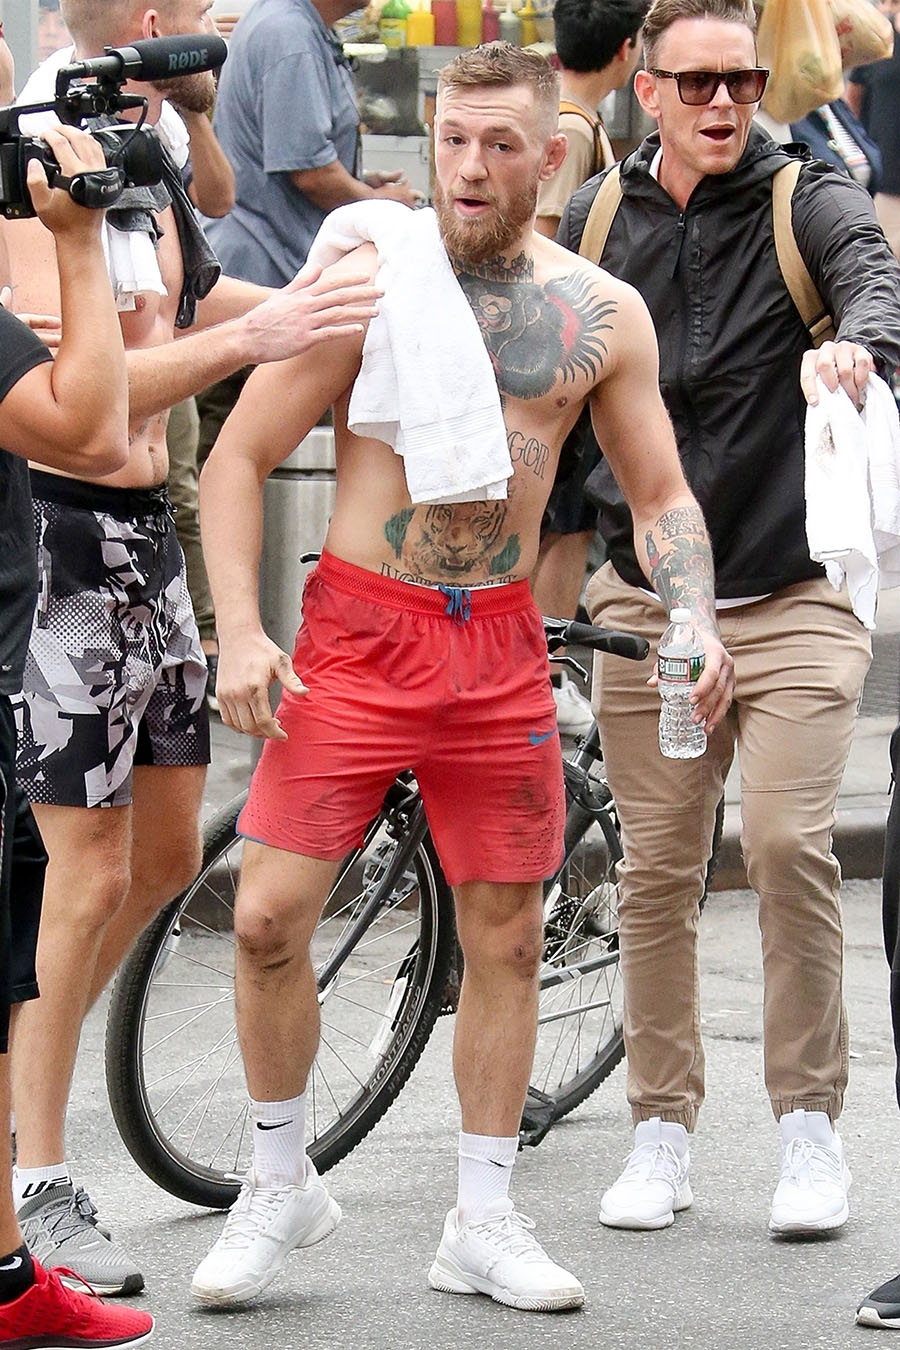 Mma Fighter Conor Mcgregor Was Seen Walking Shirtless With An Entourage Around Him Through The